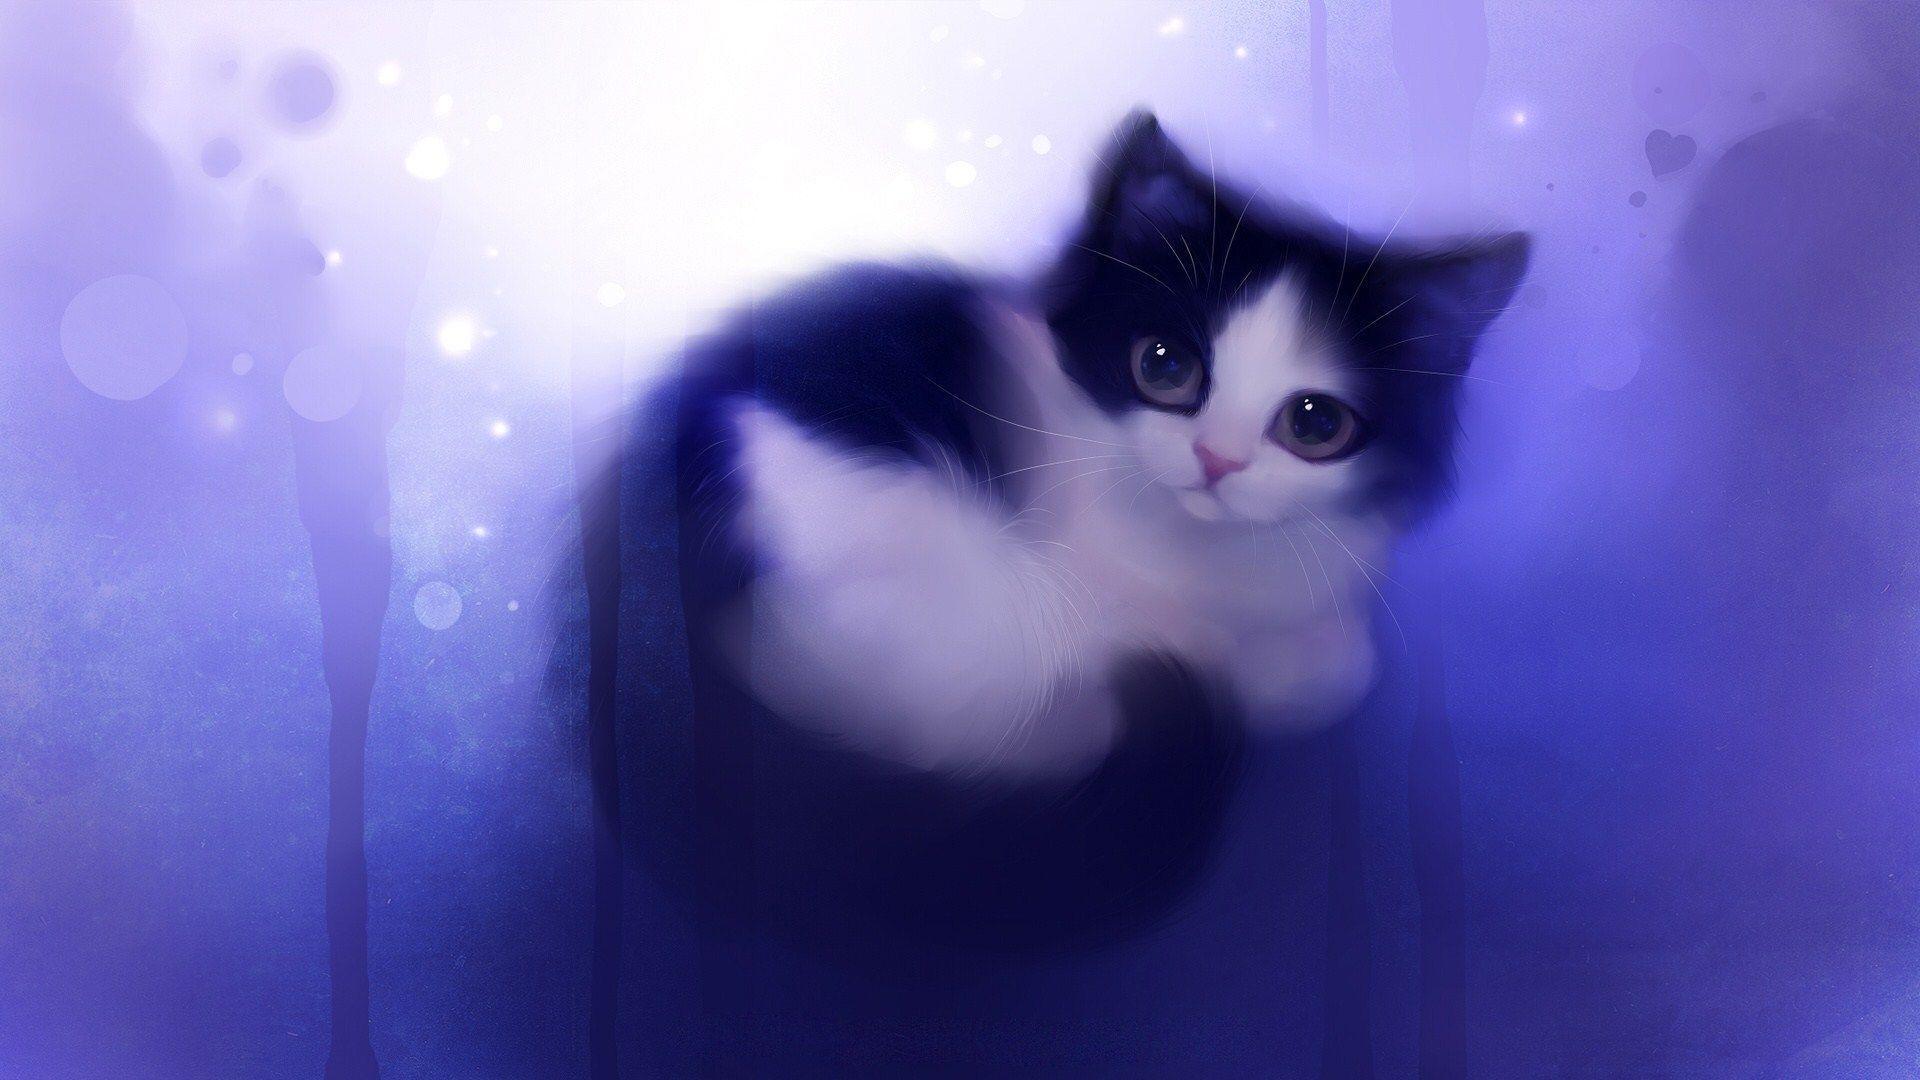 200+] Anime Cat Pictures | Wallpapers.com